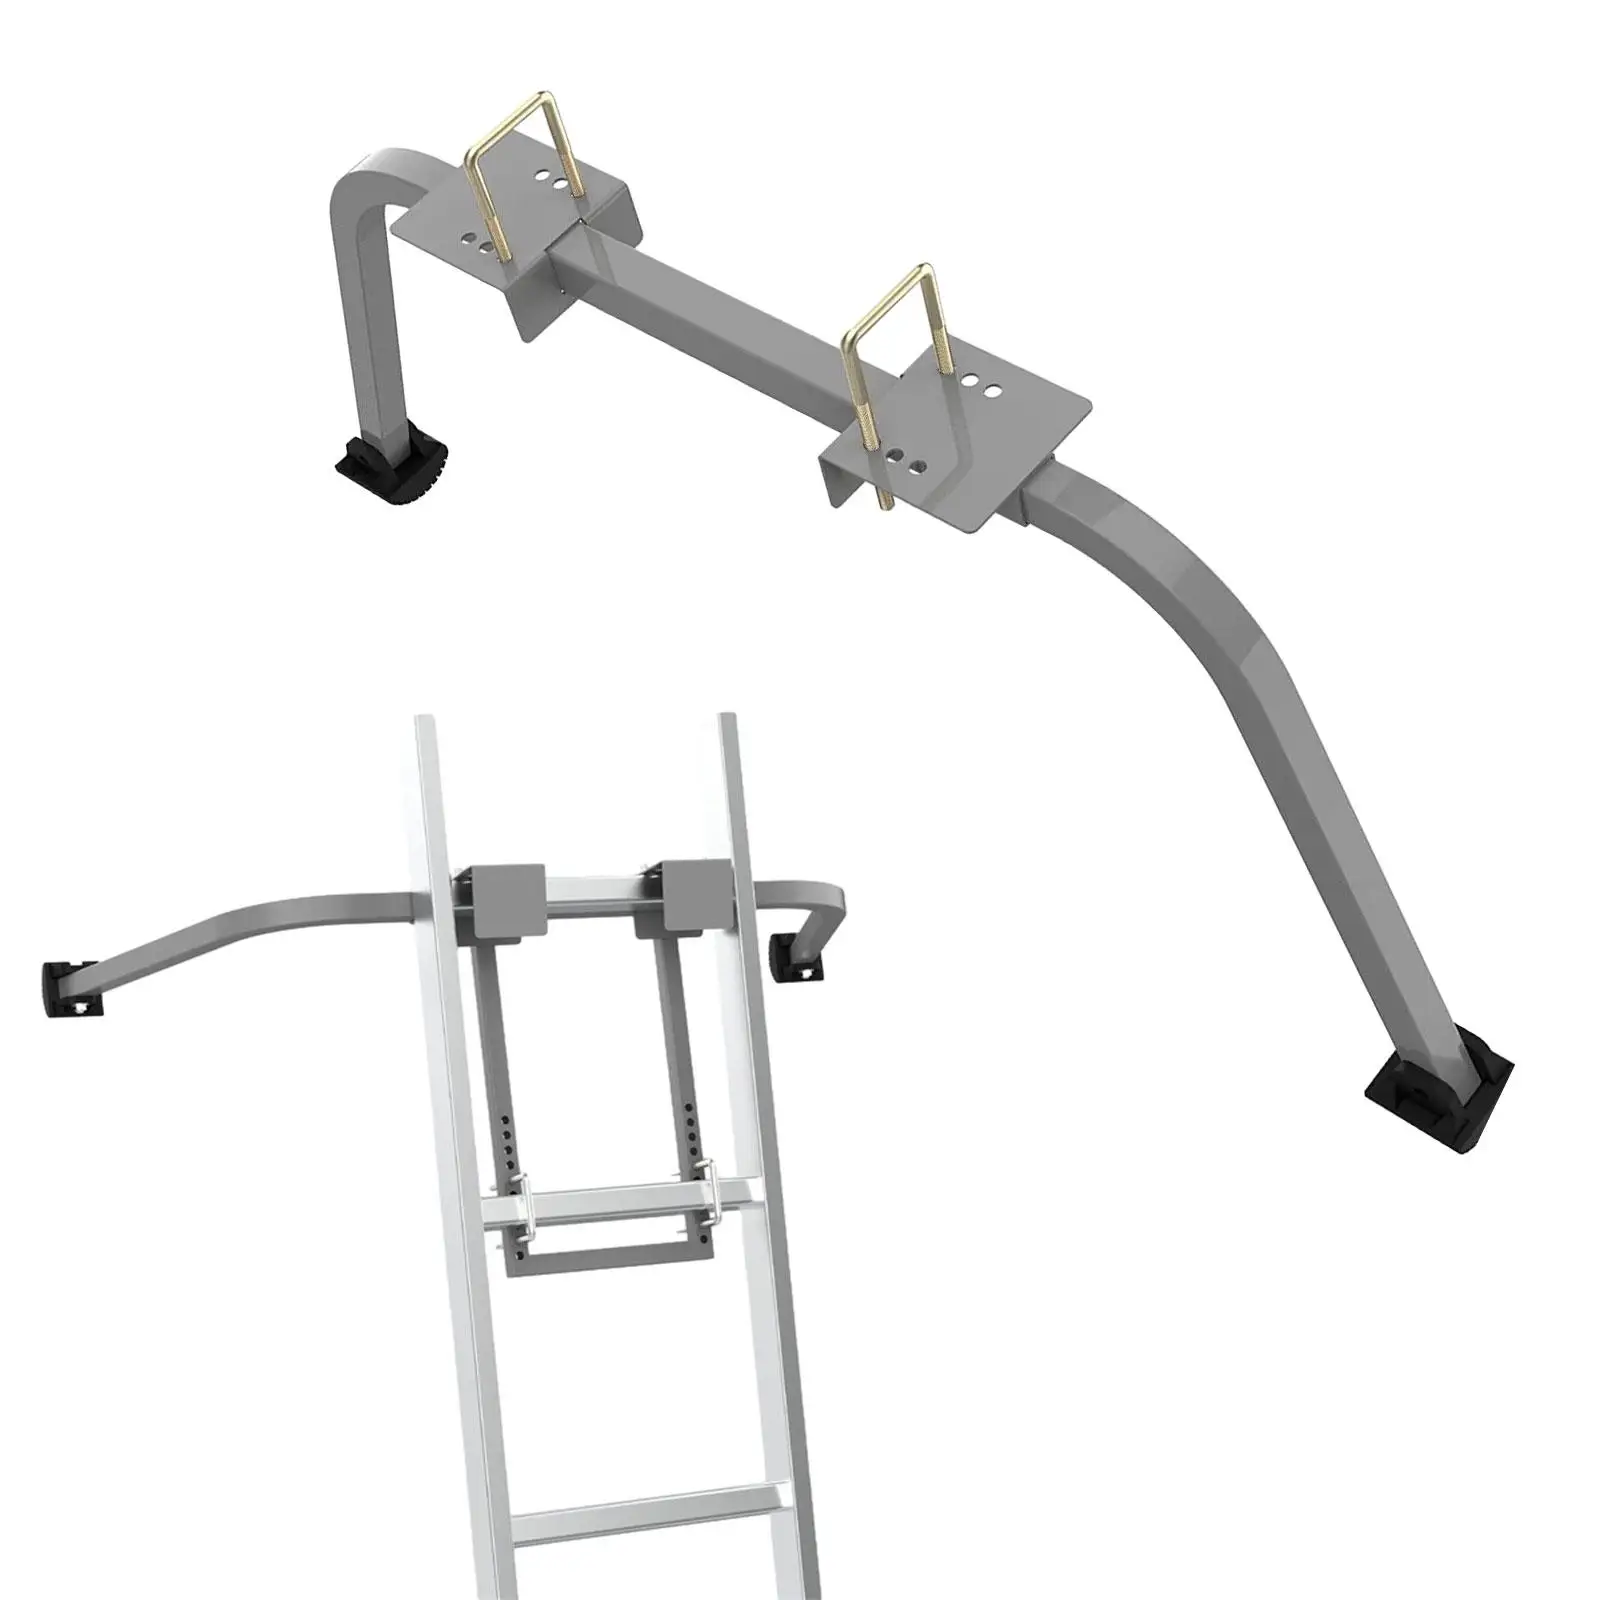 Ladder Stabilizer Accessory with Rubber Bottom Pad Straight Ladder Stabilizer for Roof Ladders Gutter Projects Wall Outdoor Home